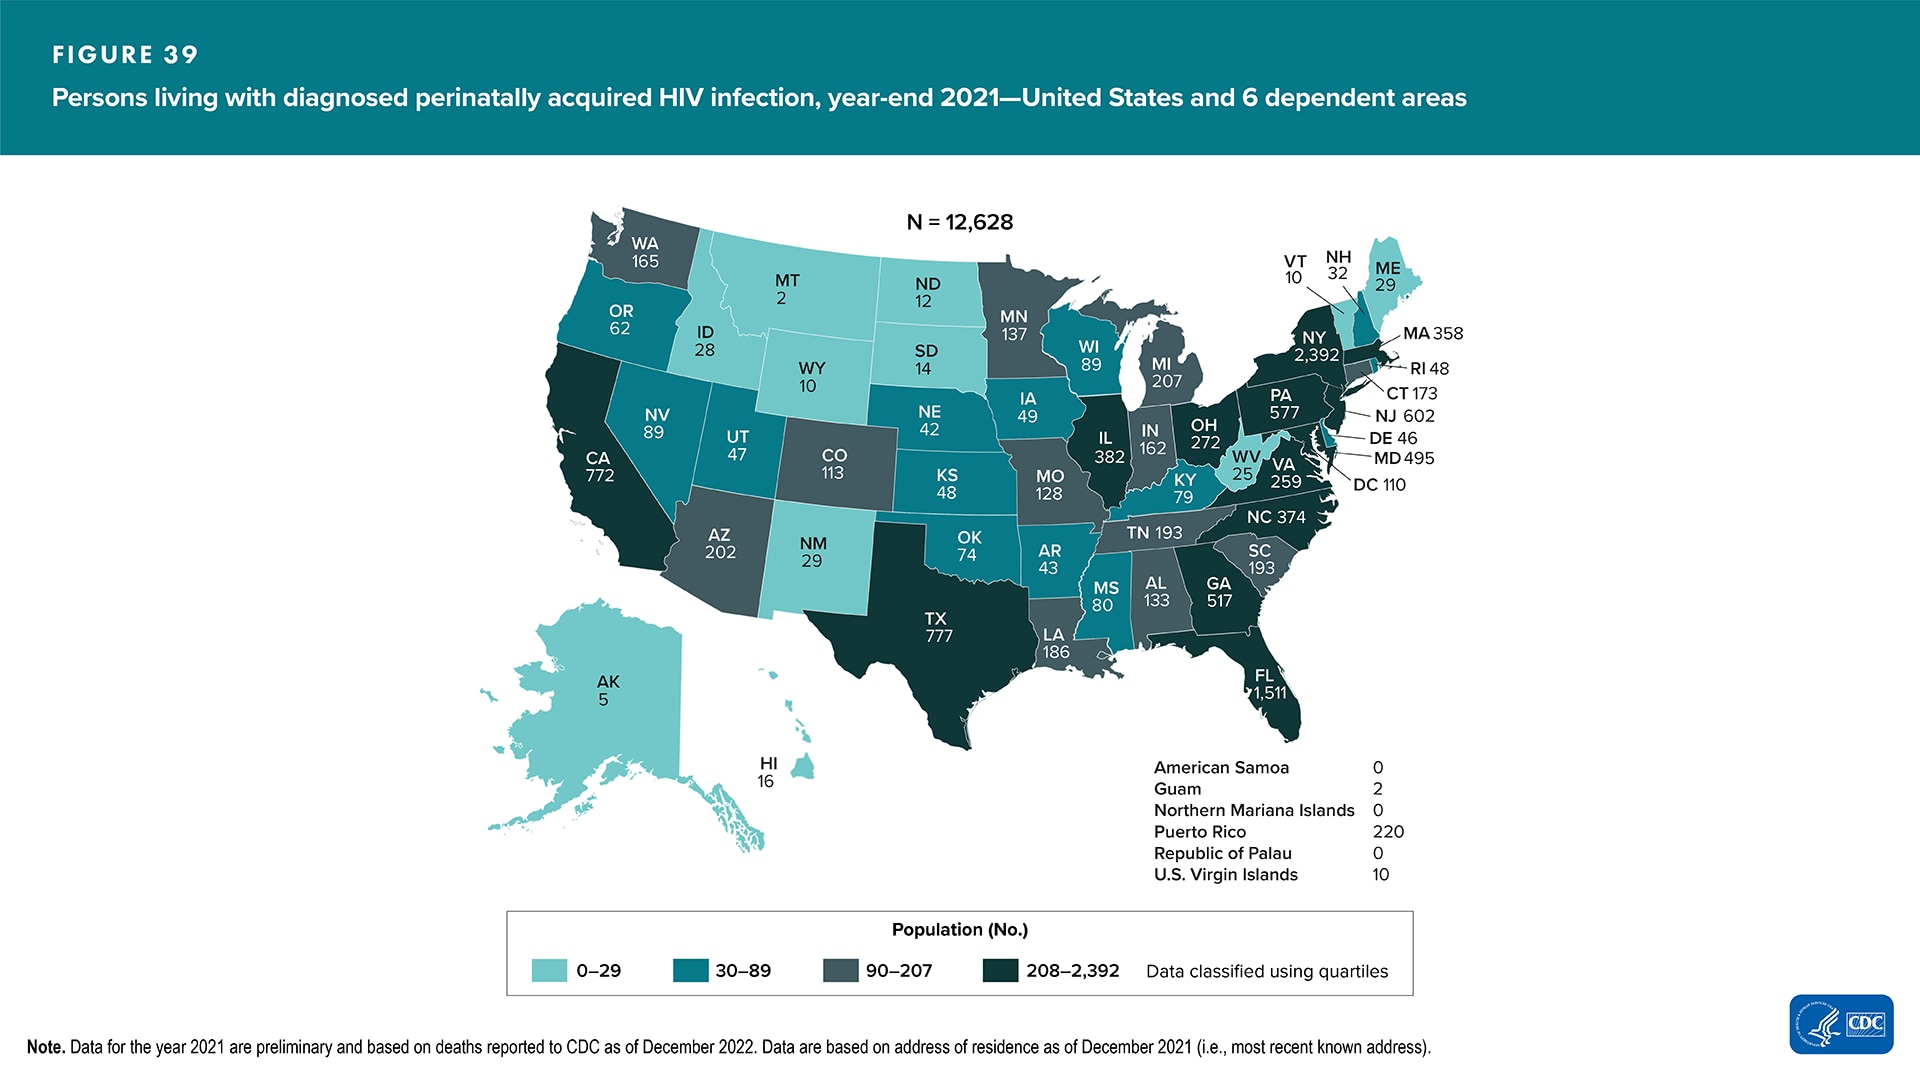 At year-end 2021 in the United States and 6 dependent areas, there were 12,628 persons living with diagnosed, perinatally acquired HIV infection.